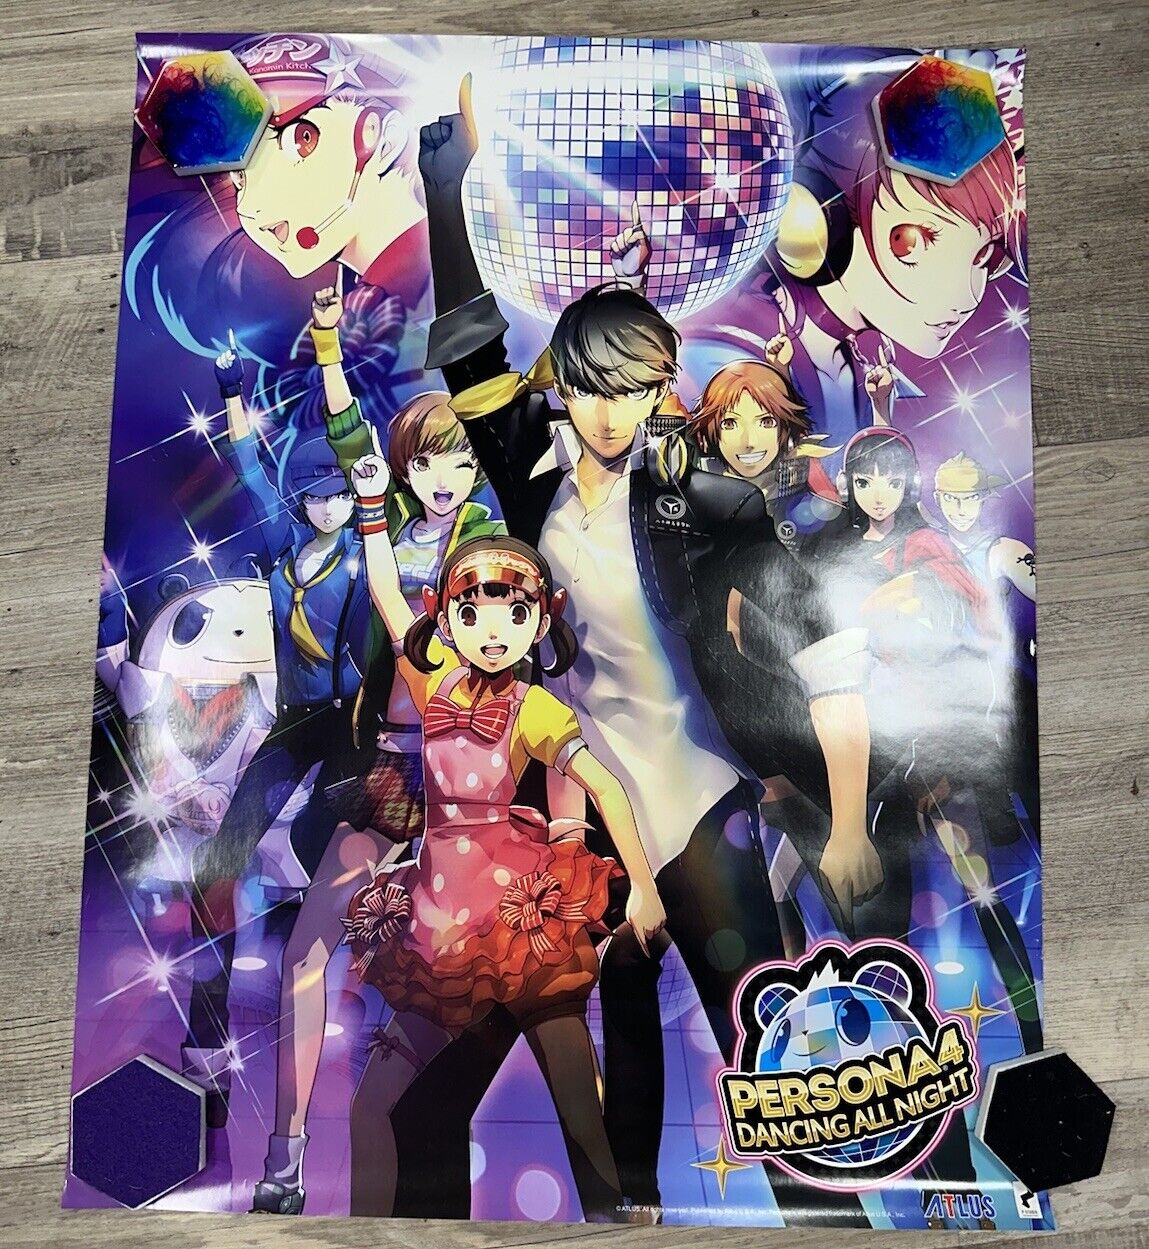 Persona 4 Dancing All Night ORIGINAL In Store Promo Poster 24x28” Single sided